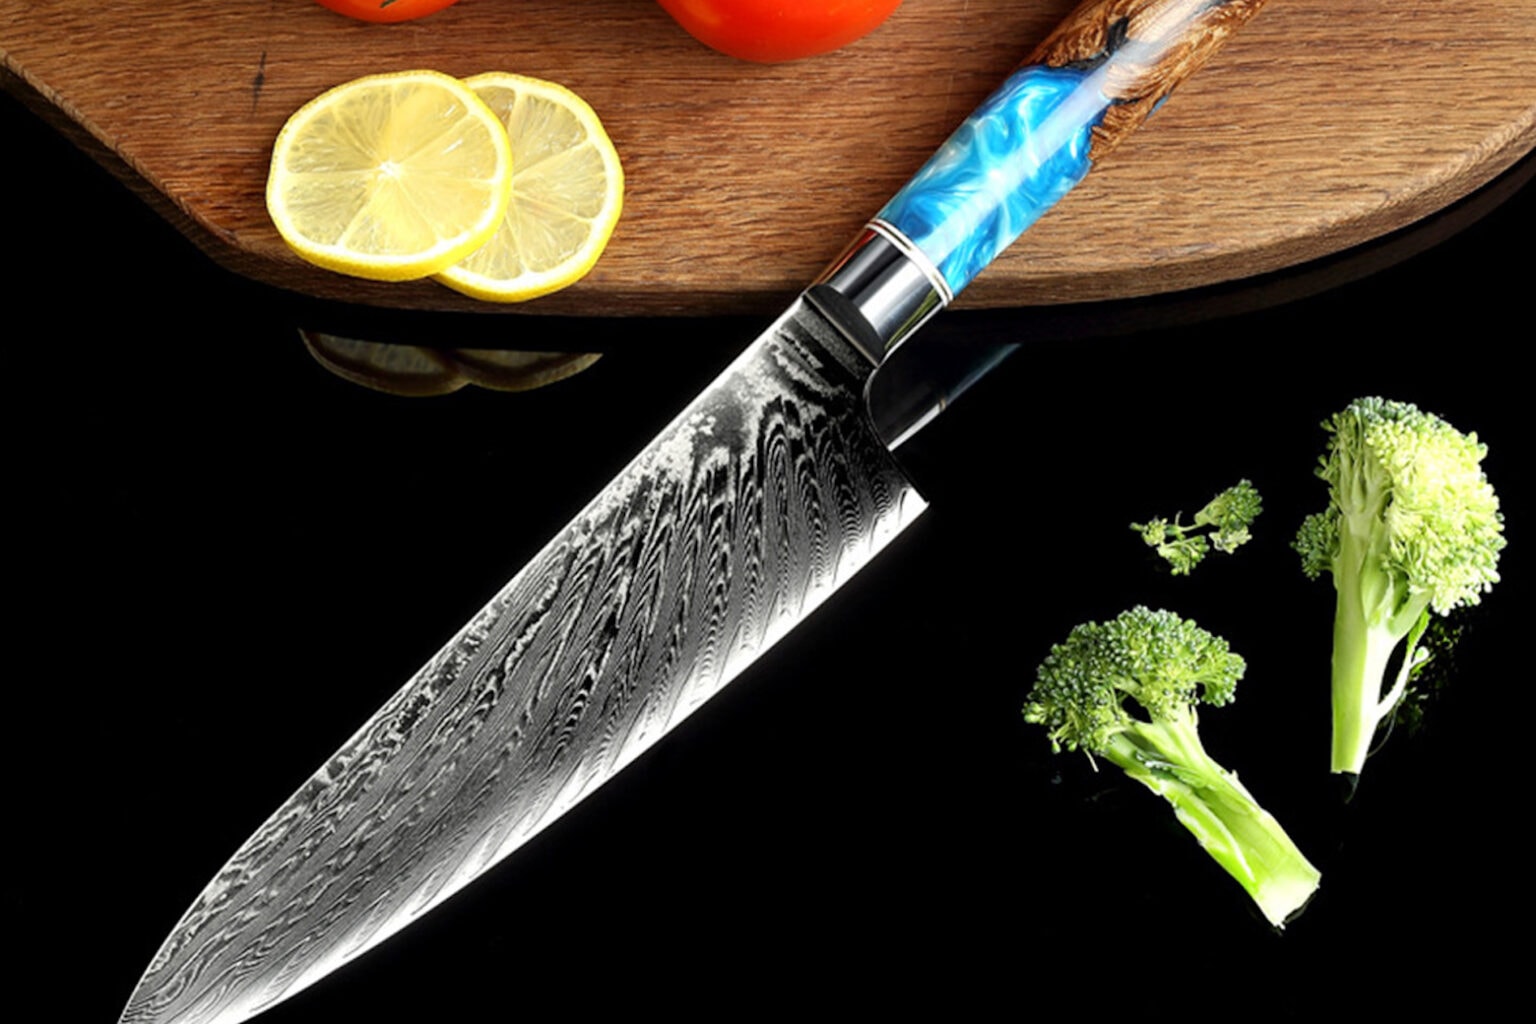 It's your last chance for a chef's knife that's a cut above for sheared off prices.